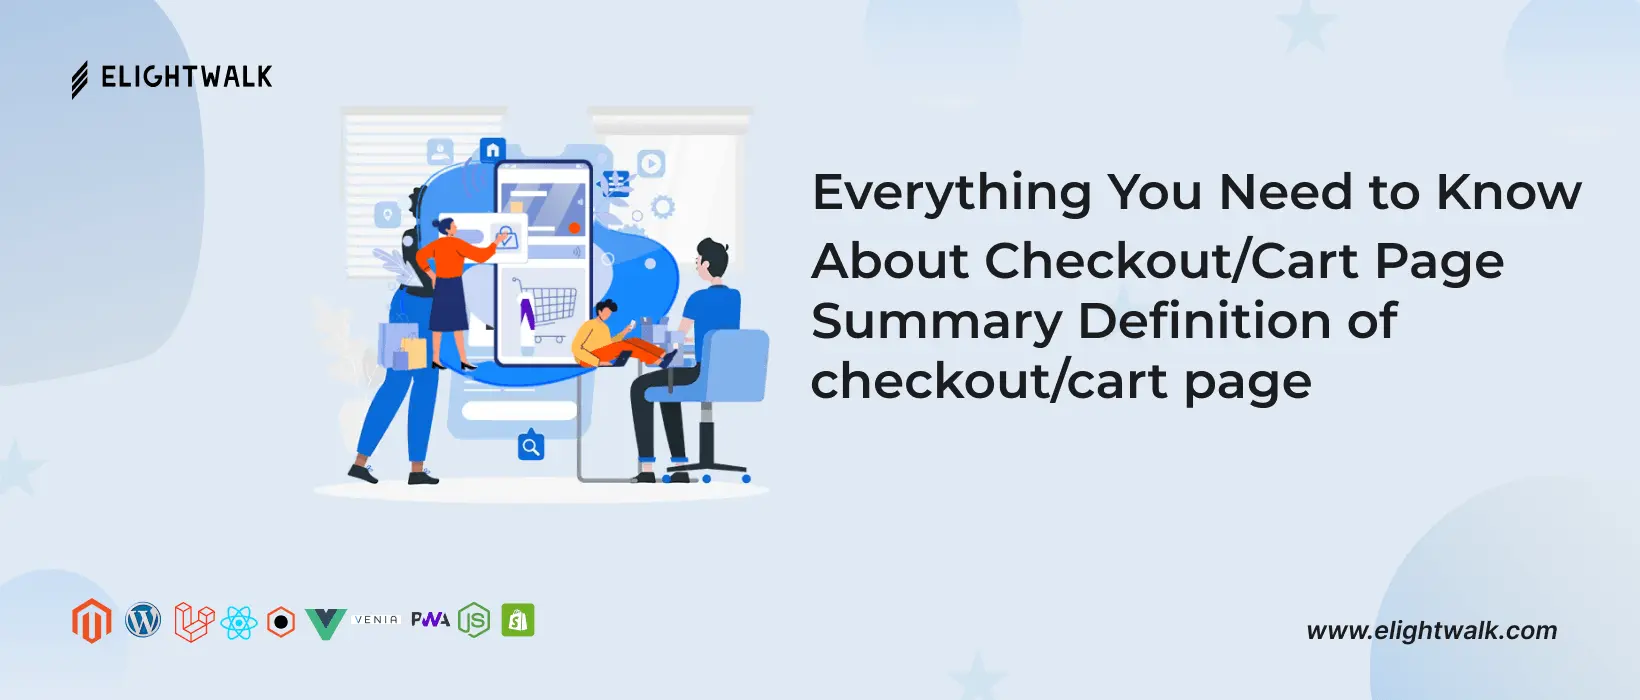 Everything You Need to Know About Checkout/Cart Page